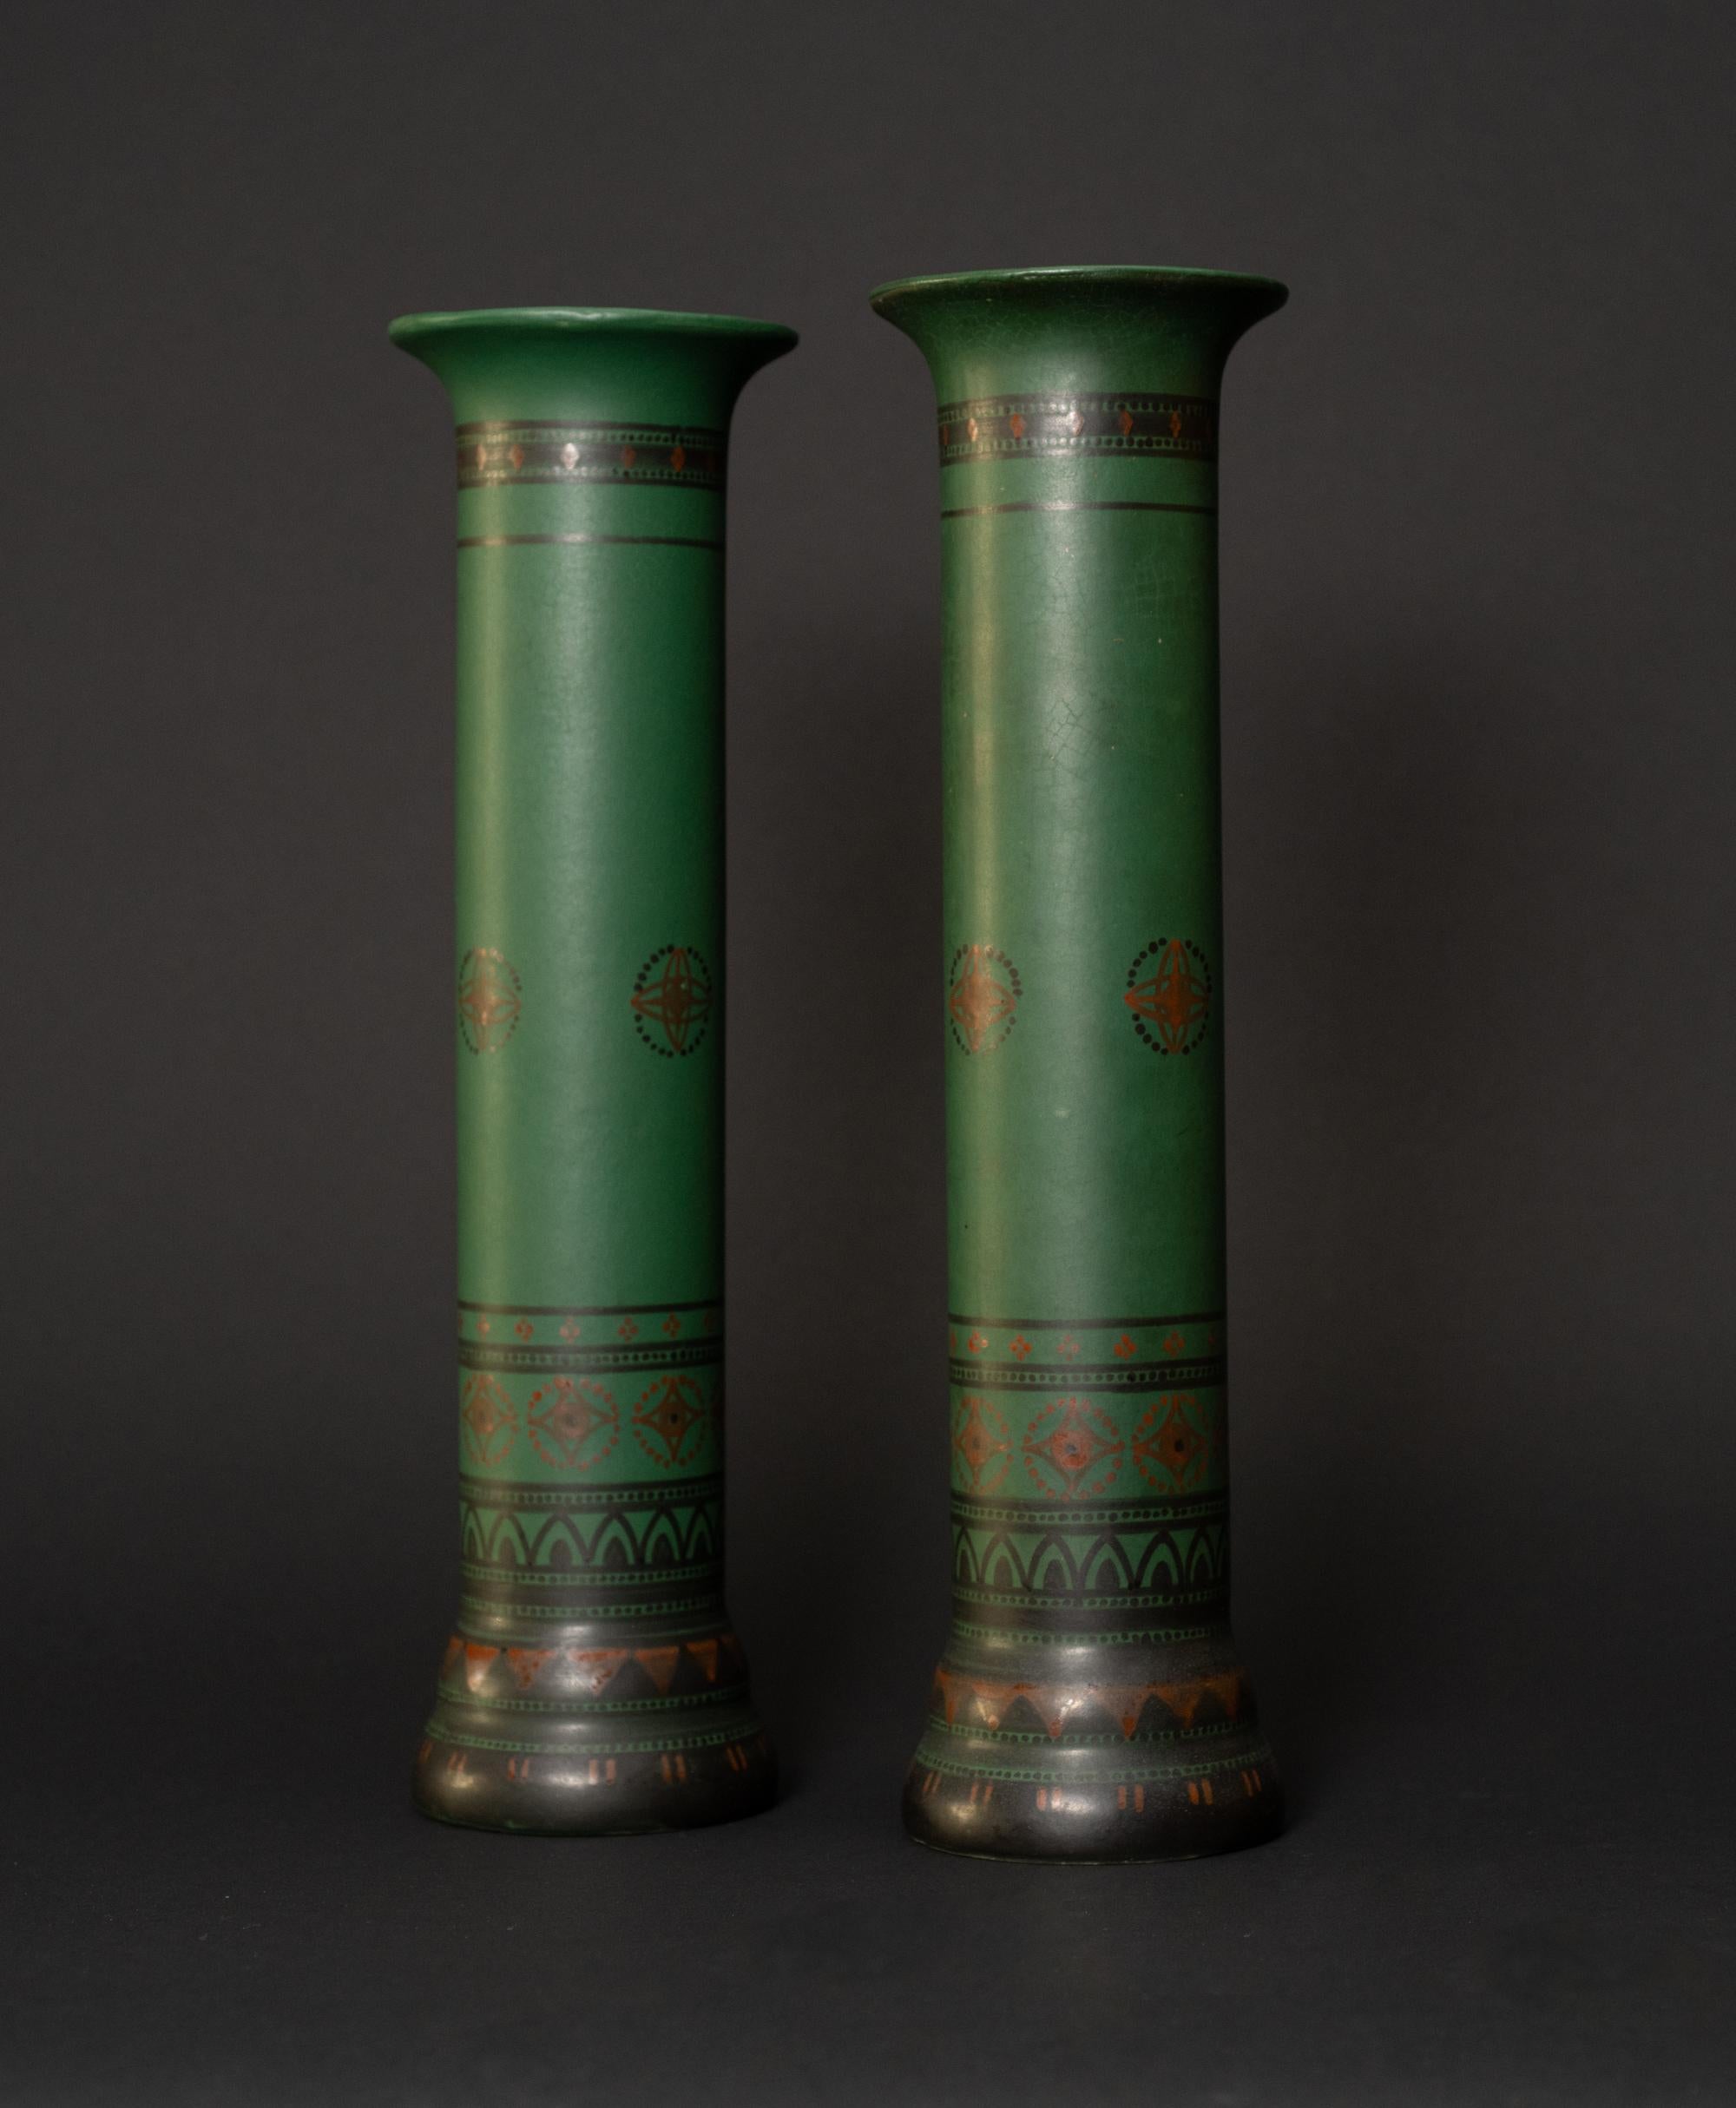 
These matching green pillar vases' bases are painted black and contain various geometric designs that work their way up the shaft of the vase, eventually becoming less concentrated. The designs utilize black, red, and gold motifs and generally use